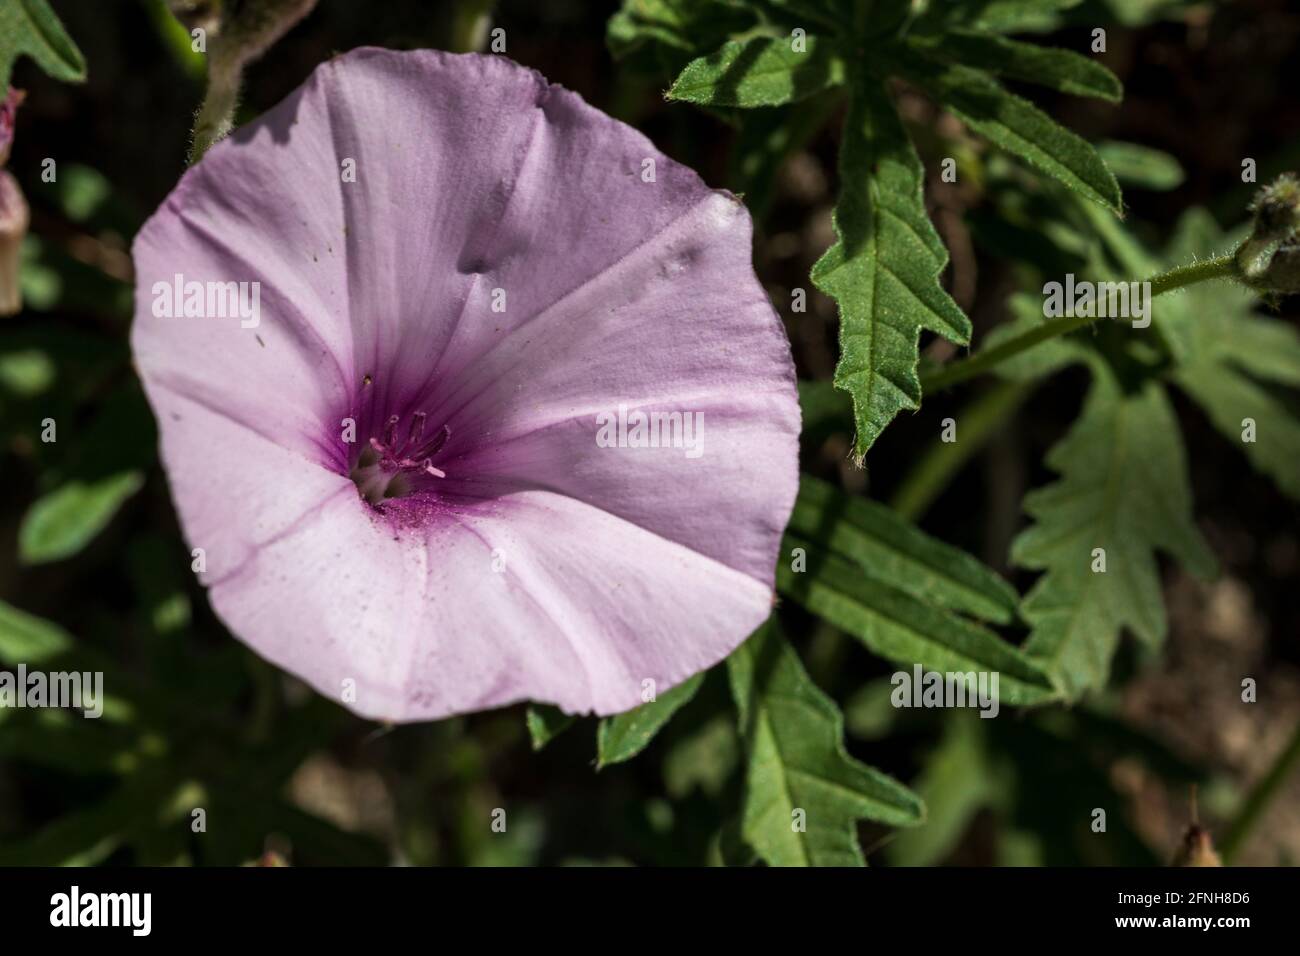 Convolvulus althaeoides, Malve-leaved bindweed Pflanze in Blume Stockfoto